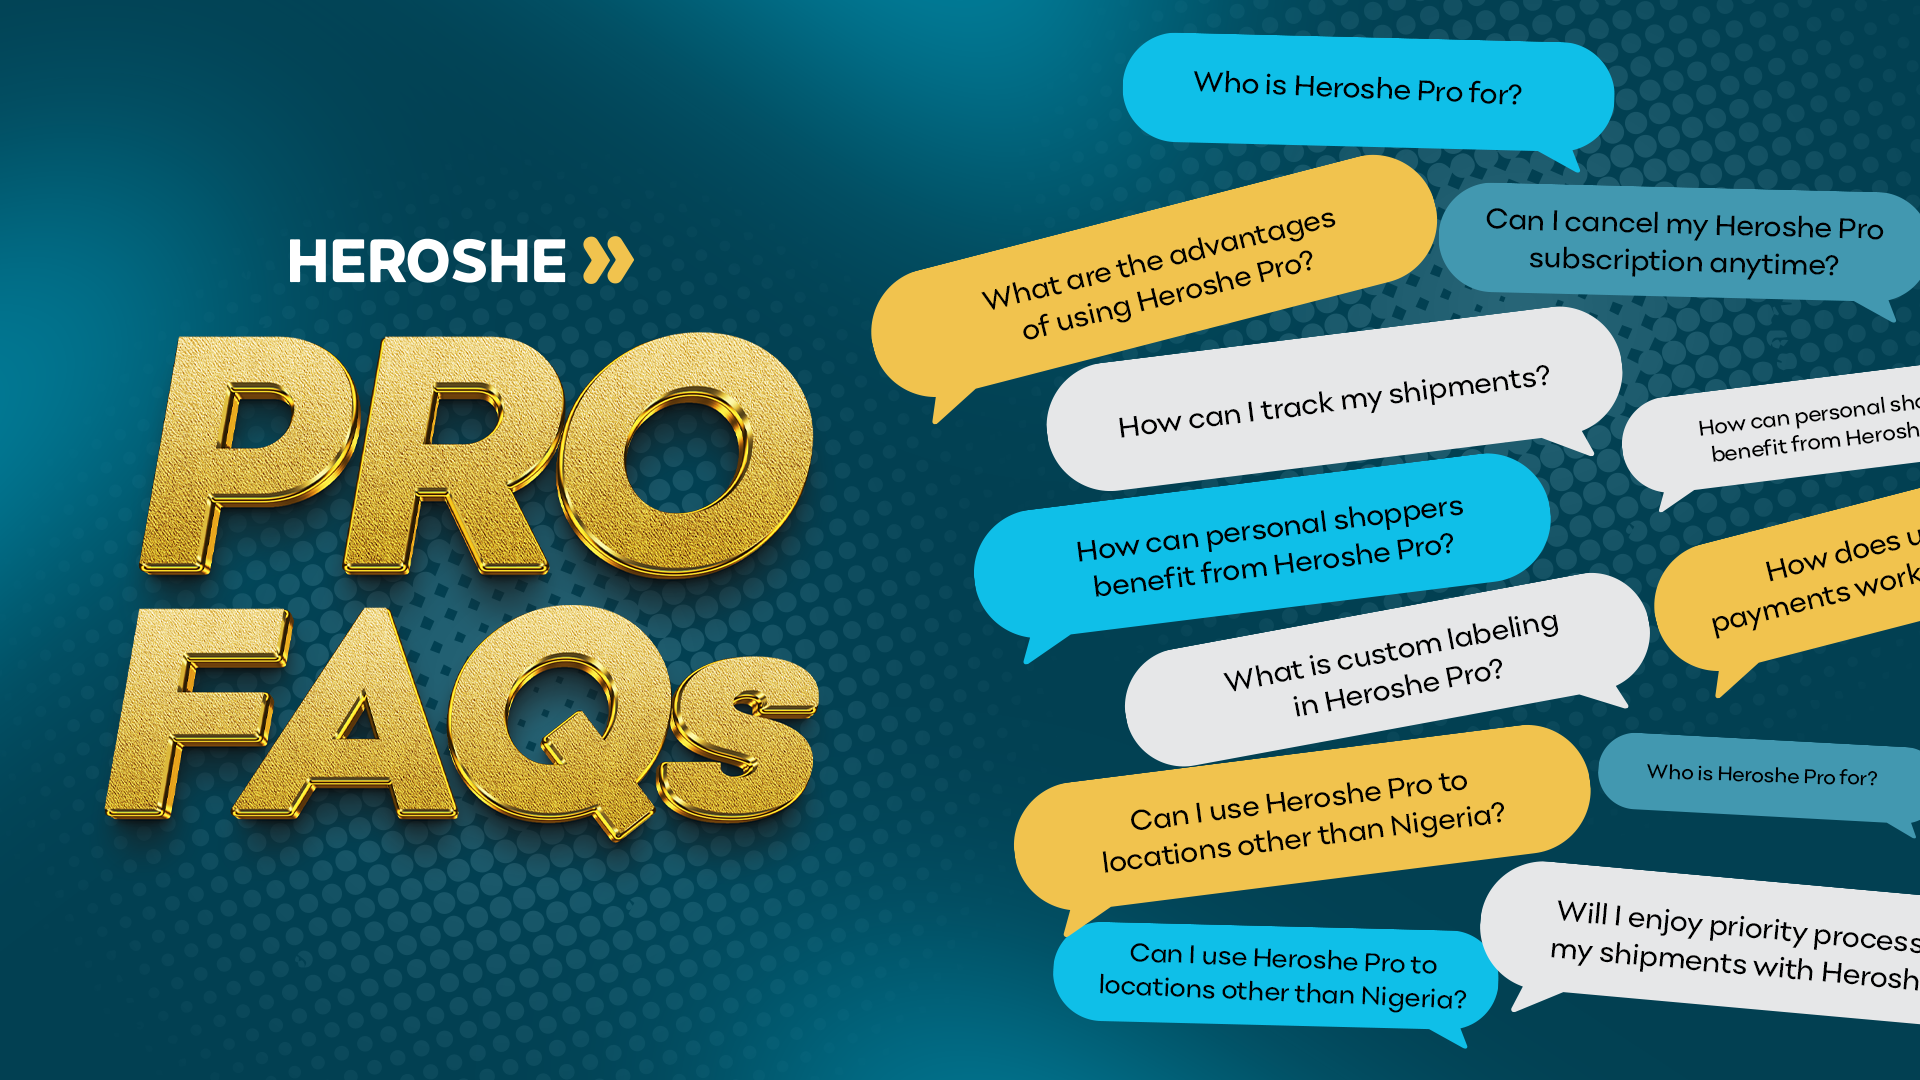 Frequently Asked Questions About Using Heroshe Pro